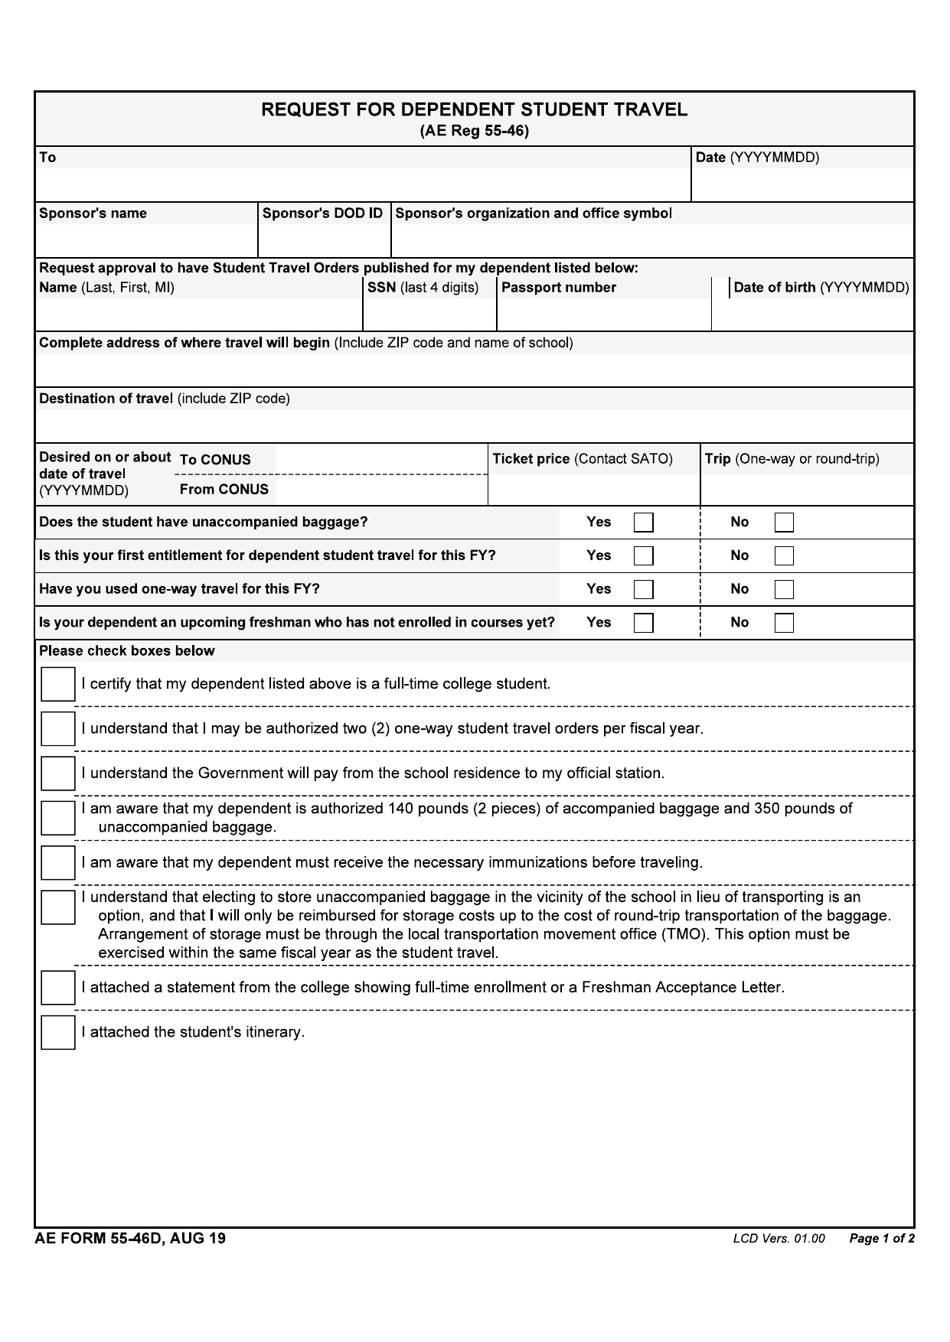 AE Form 55-46D Request for Dependent Student Travel, Page 1